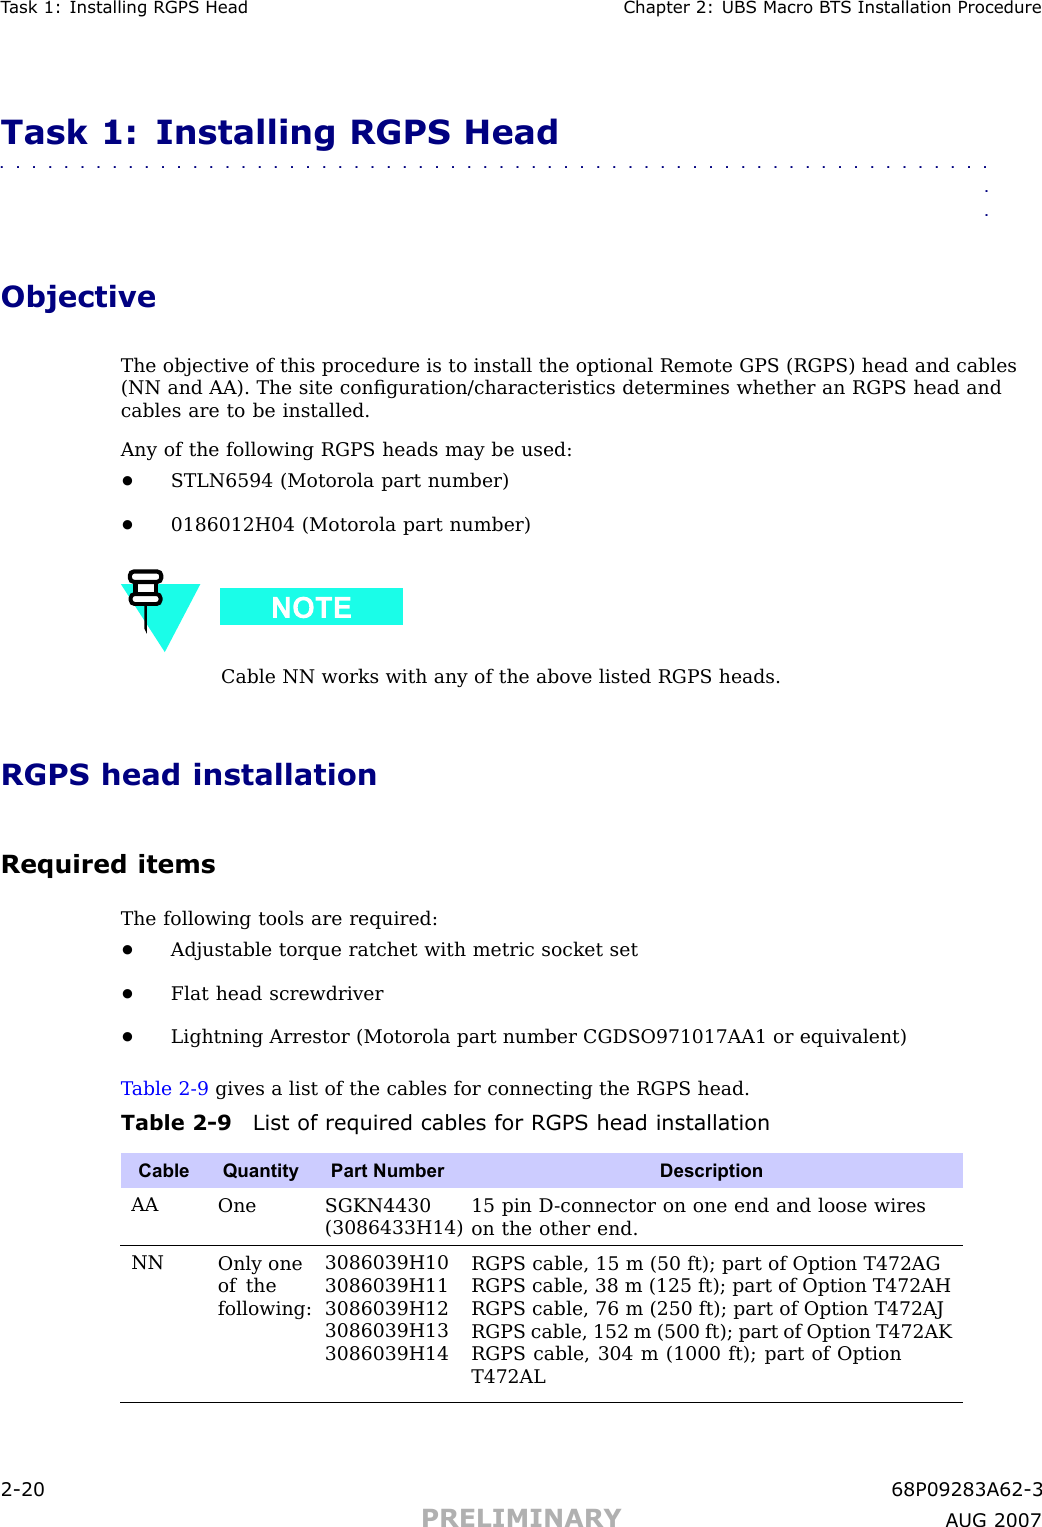 T ask 1: Installing RGPS Head Chapter 2: UBS Macro B T S Installation ProcedureTask 1: Installing RGPS Head■■■■■■■■■■■■■■■■■■■■■■■■■■■■■■■■■■■■■■■■■■■■■■■■■■■■■■■■■■■■■■■■ObjectiveThe objective of this procedure is to install the optional Remote GPS (RGPS) head and cables(NN and AA). The site conﬁguration/characteristics determines whether an RGPS head andcables are to be installed.Any of the following RGPS heads may be used:•STLN6594 (Motorola part number)•0186012H04 (Motorola part number)Cable NN works with any of the above listed RGPS heads.RGPS head installationRequired itemsThe following tools are required:•Adjustable torque ratchet with metric socket set•Flat head screwdriver•Lightning Arrestor (Motorola part number CGDSO971017AA1 or equivalent)T able 2 -9 gives a list of the cables for connecting the RGPS head.Table 2 -9 List of required cables for RGPS head installationCable QuantityPart Number DescriptionAAOne SGKN4430(3086433H14)15 pin D -connector on one end and loose wireson the other end.NNOnly oneof thefollowing:3086039H103086039H113086039H123086039H133086039H14RGPS cable, 15 m (50 ft); part of Option T472AGRGPS cable, 38 m (125 ft); part of Option T472AHRGPS cable, 76 m (250 ft); part of Option T472AJRGPS cable, 152 m (500 ft); part of Option T472AKRGPS cable, 304 m (1000 ft); part of OptionT472AL2 -20 68P09283A62 -3PRELIMINARY A UG 2007